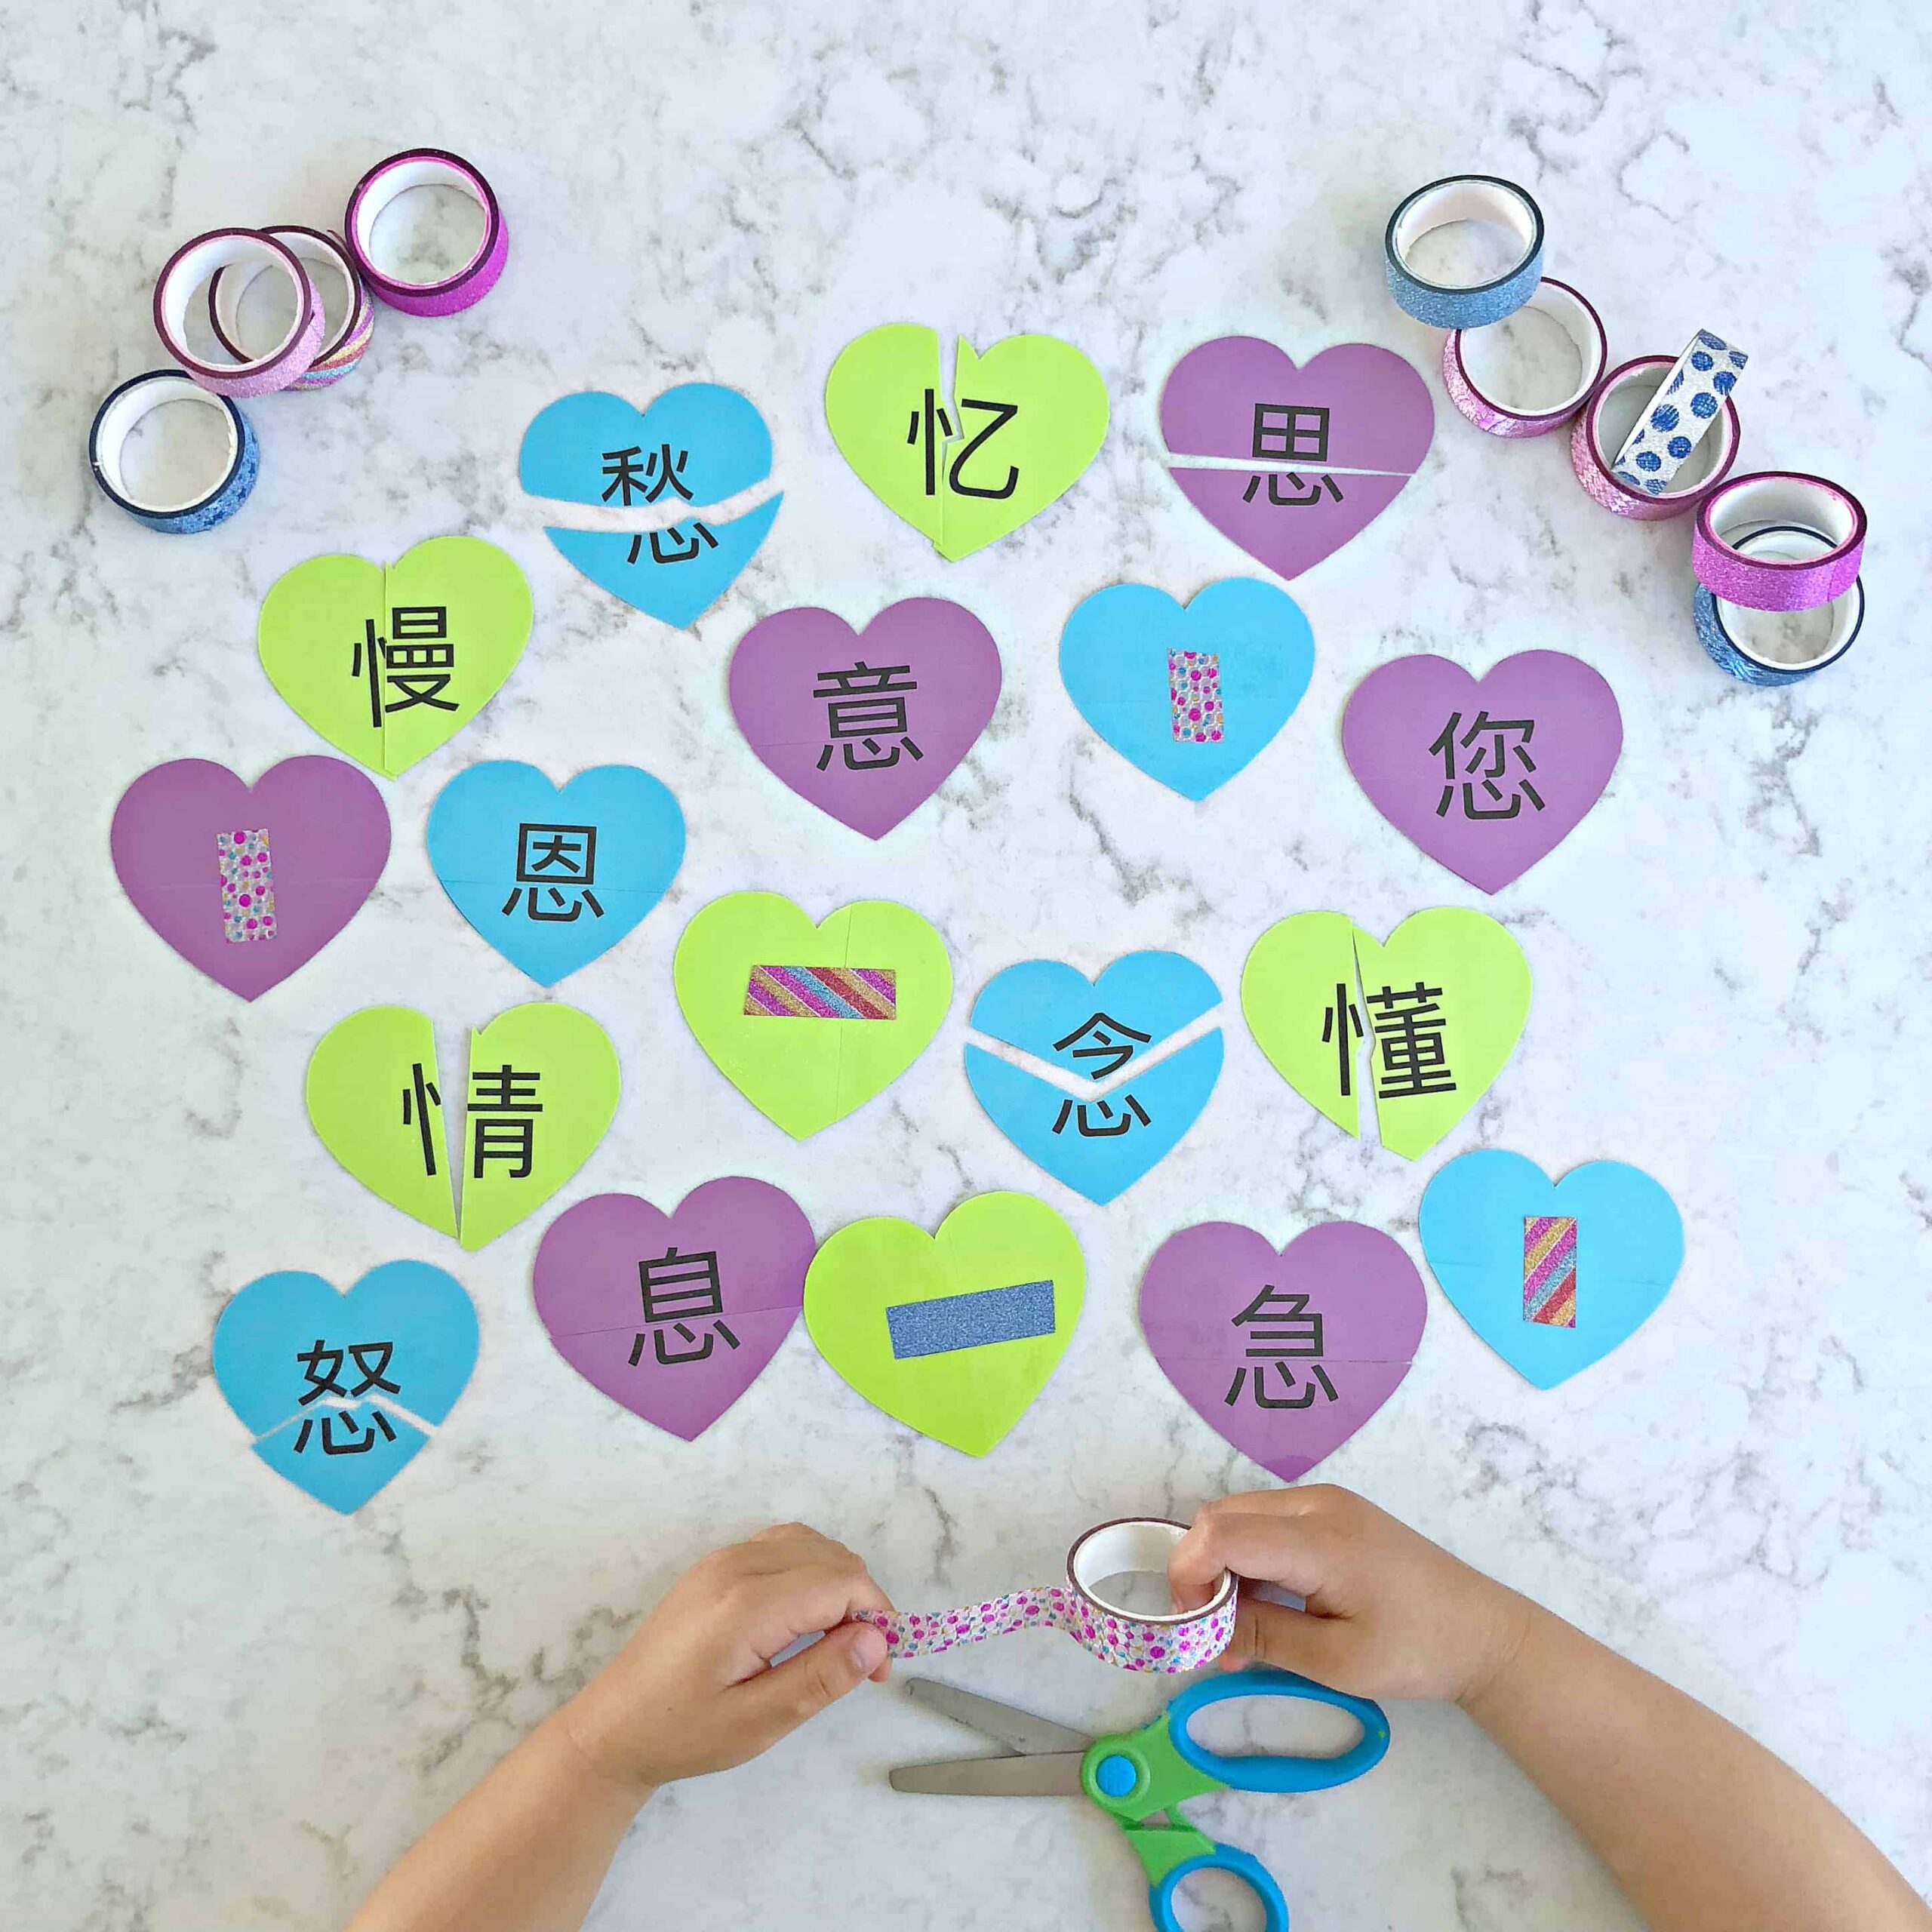 Learn Chinese Heart Radical Words with Heart Puzzles & Washi Tape!